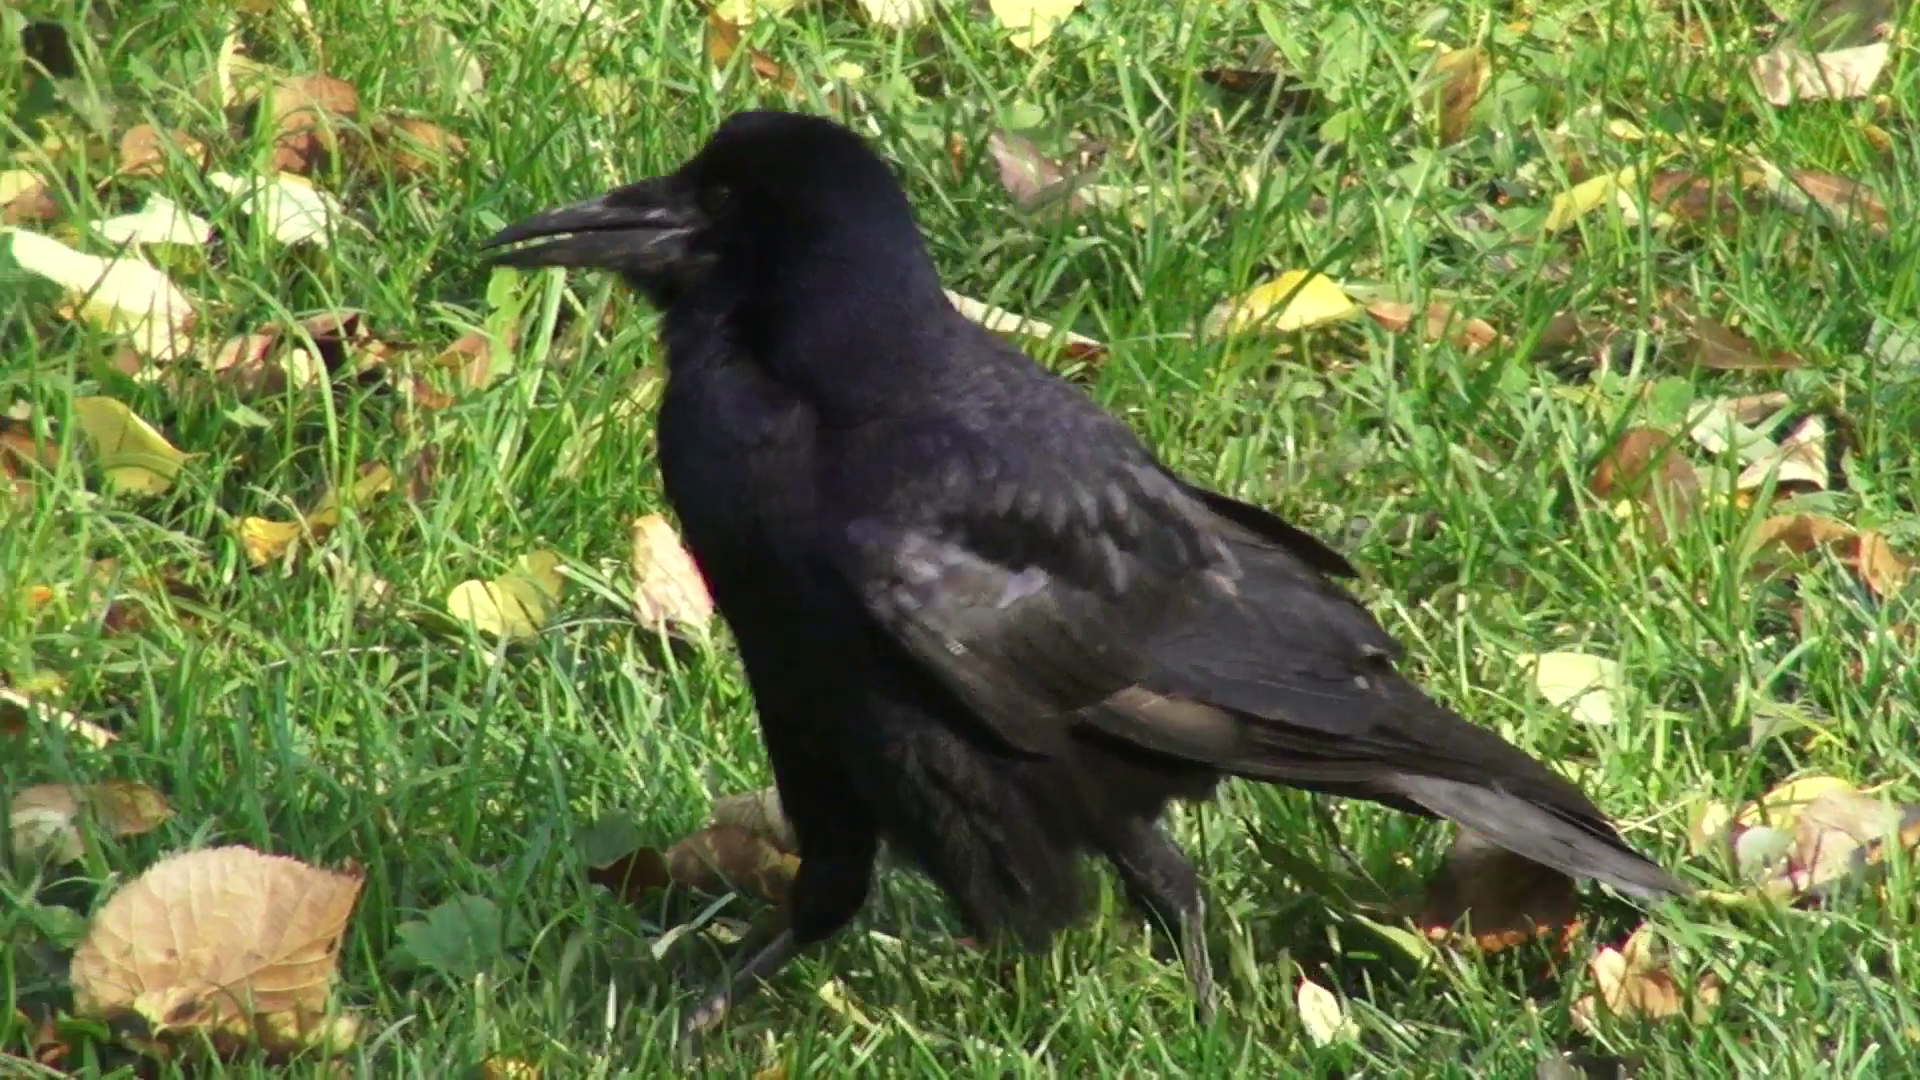 Funny crow walking on field, black bird looking at camera, close up ...